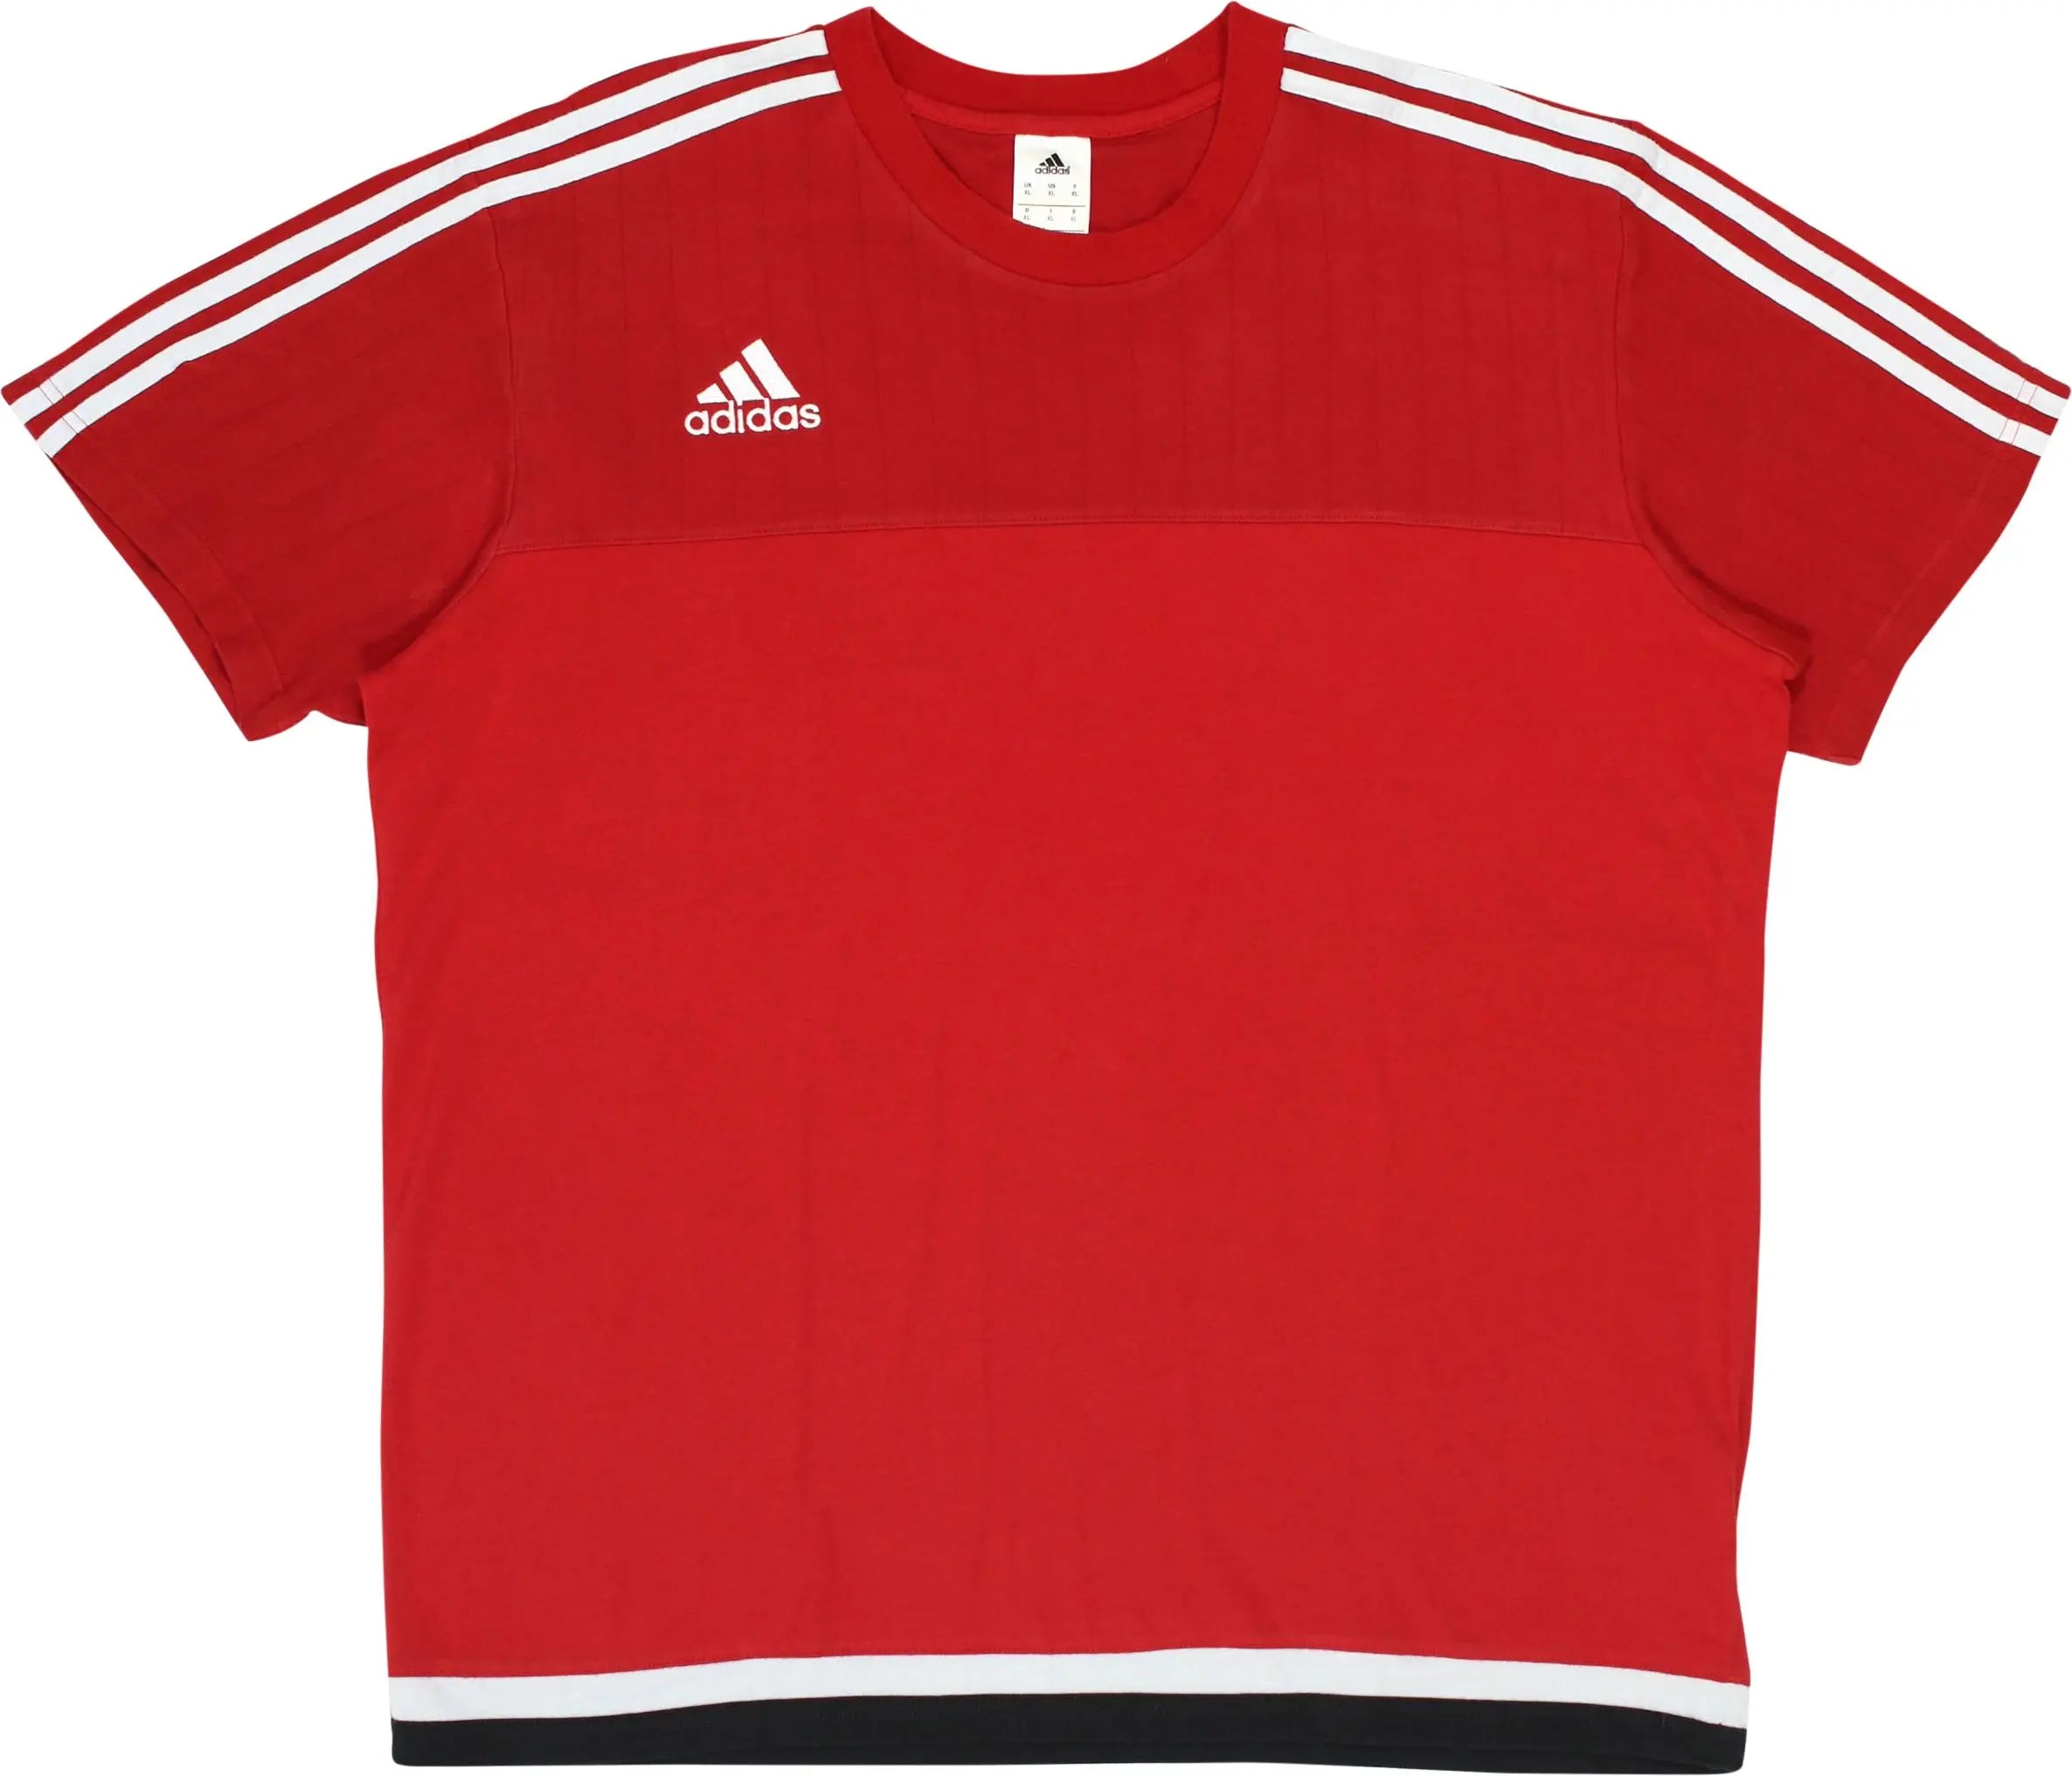 Adidas - Red T-shirt by Adidas- ThriftTale.com - Vintage and second handclothing